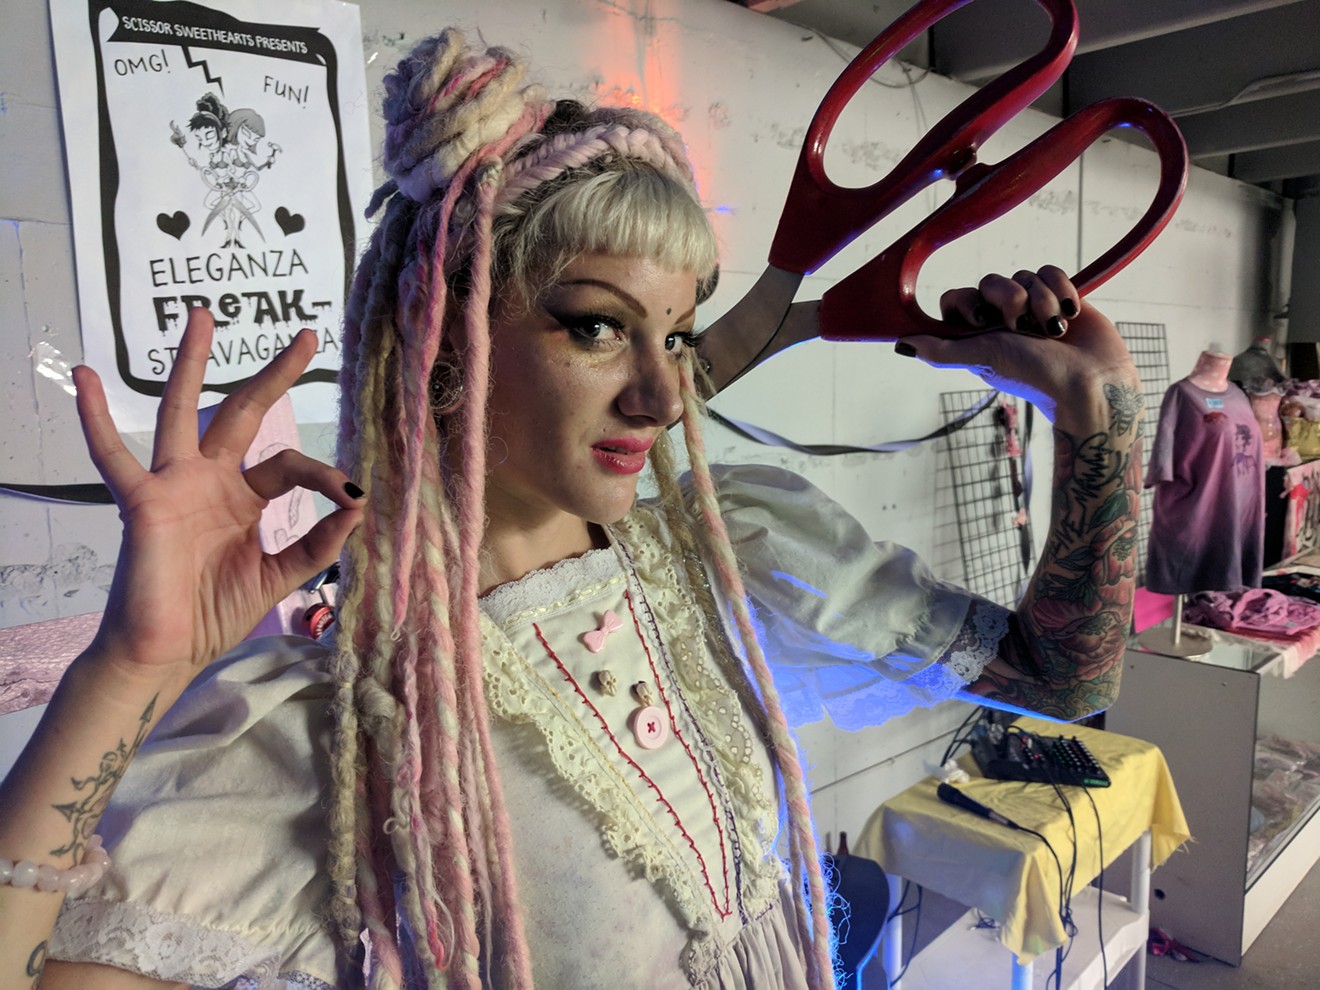 Local performance artist Siara Gray, spotted at Vision Comic Books and Oddities.